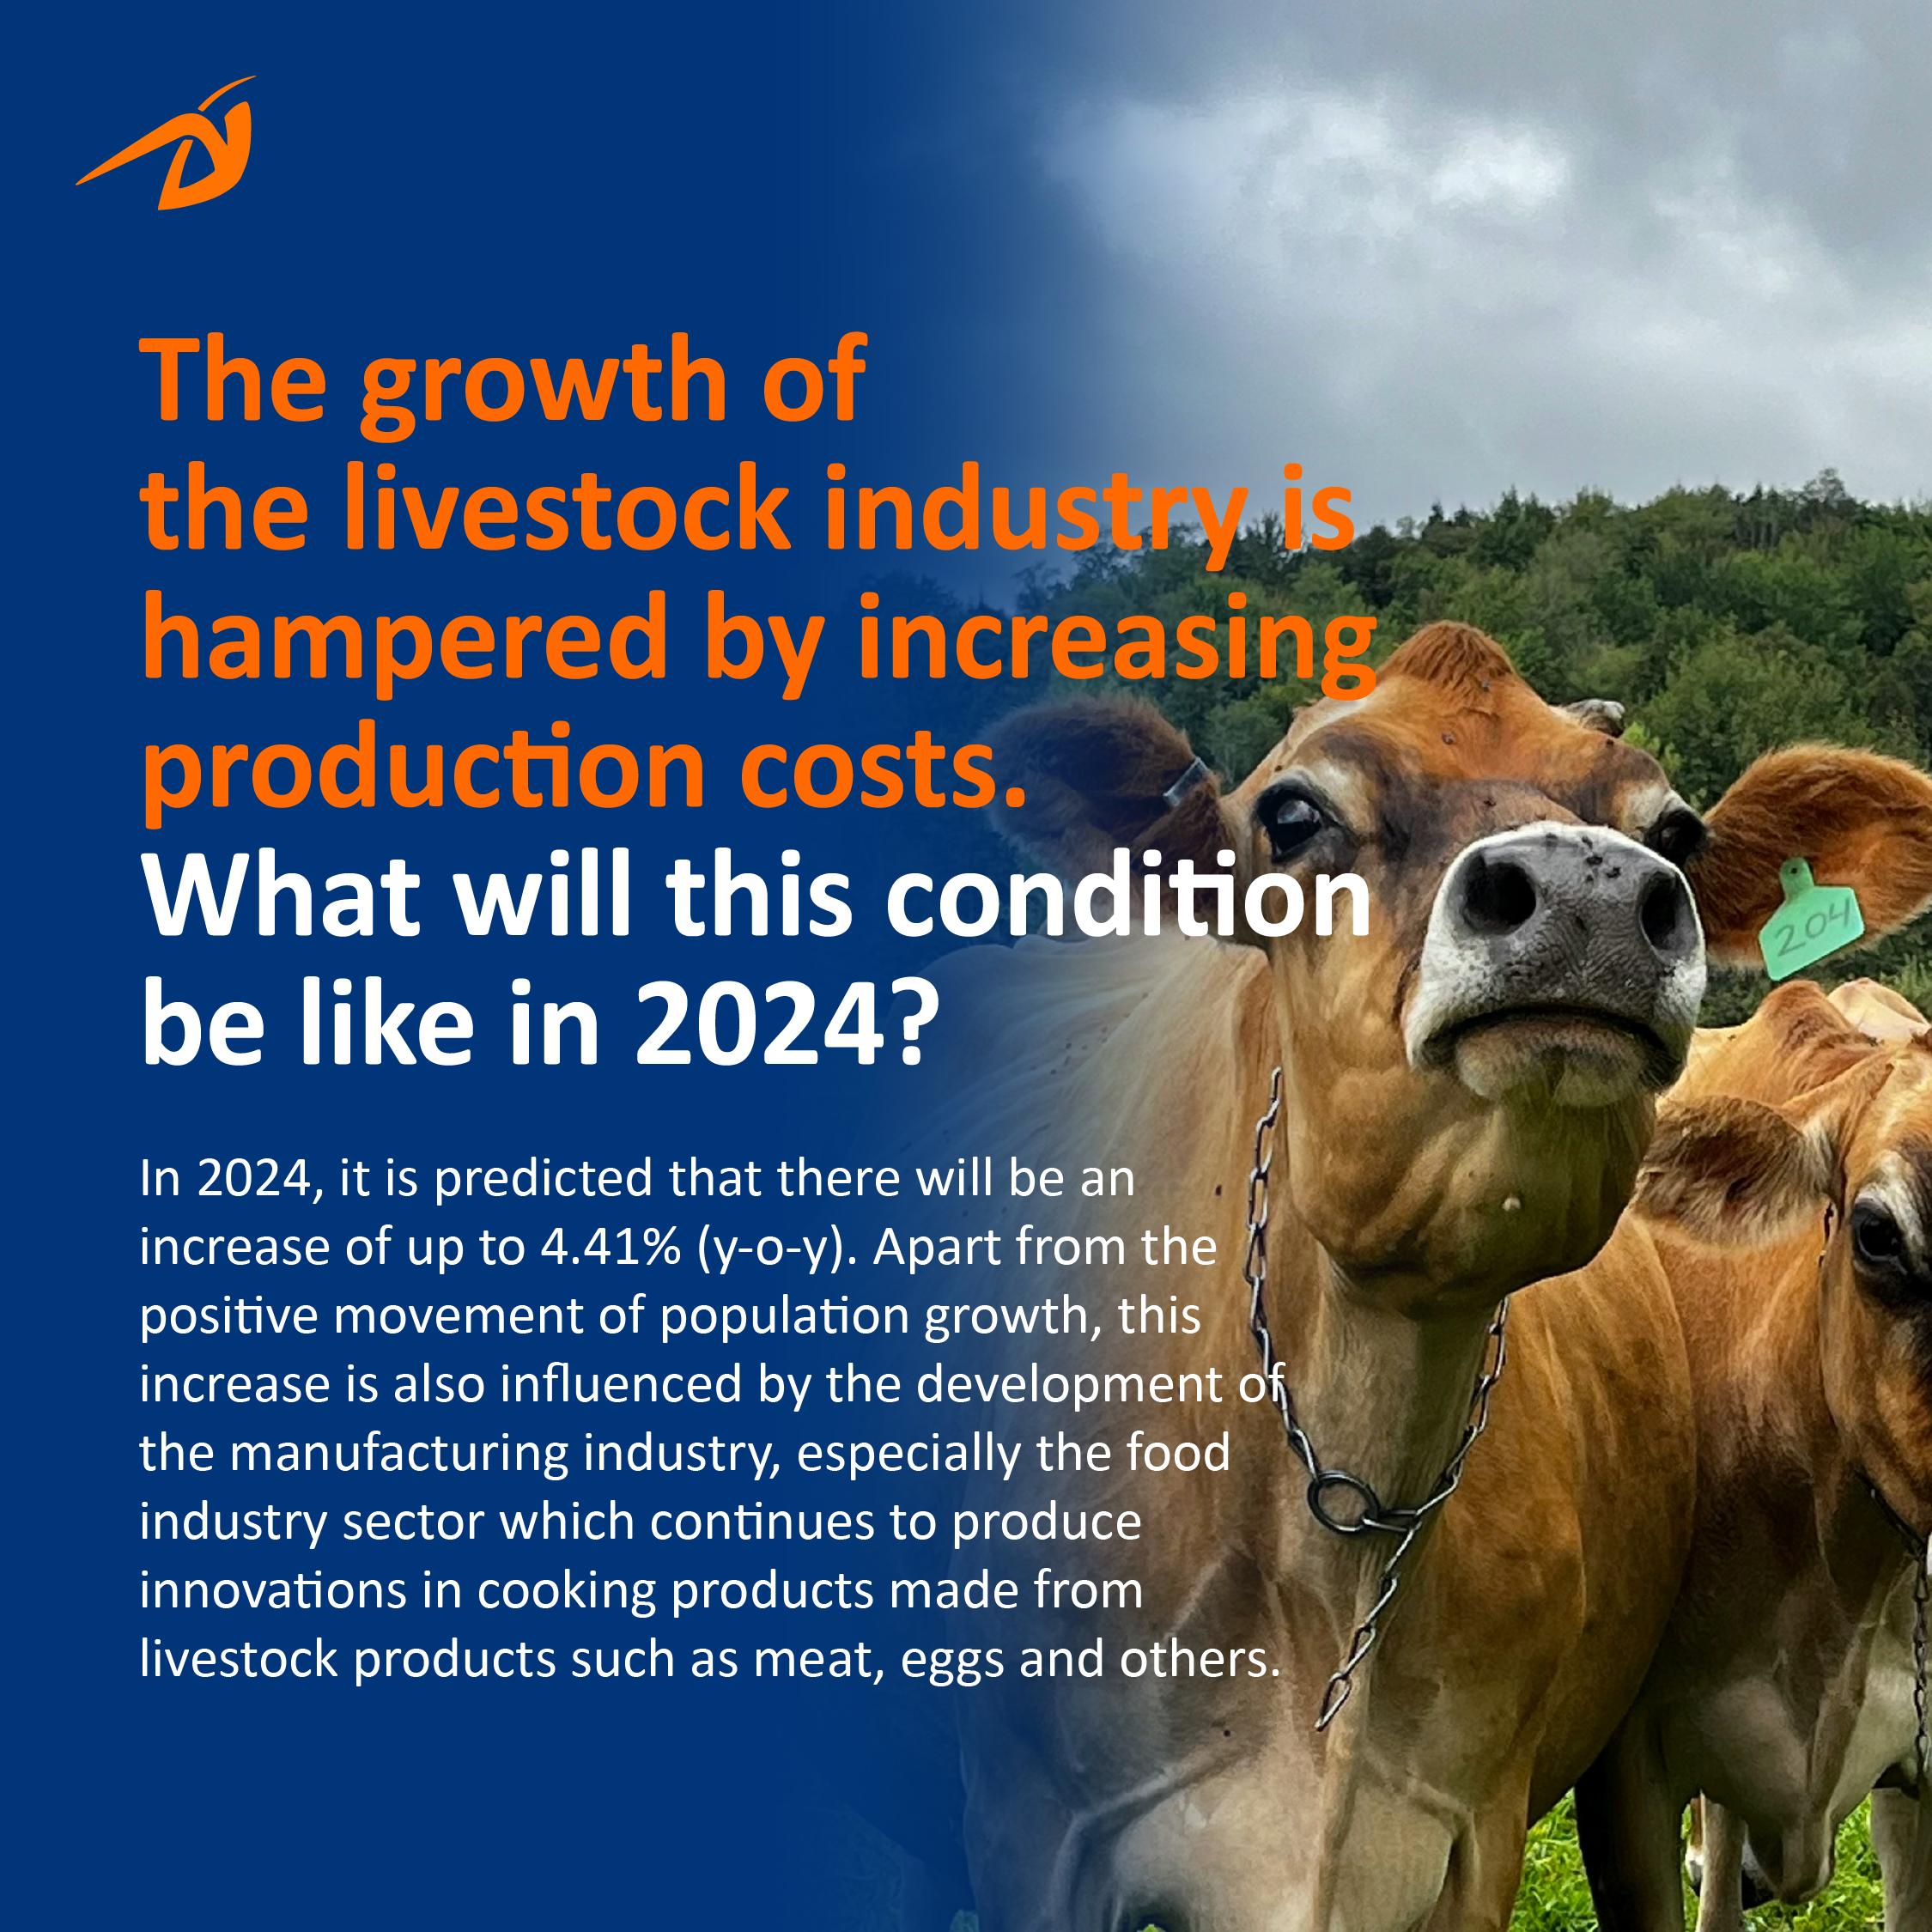 The growth of the livestock industry is hampered by increasing production costs. What will this condition be like in 2024?